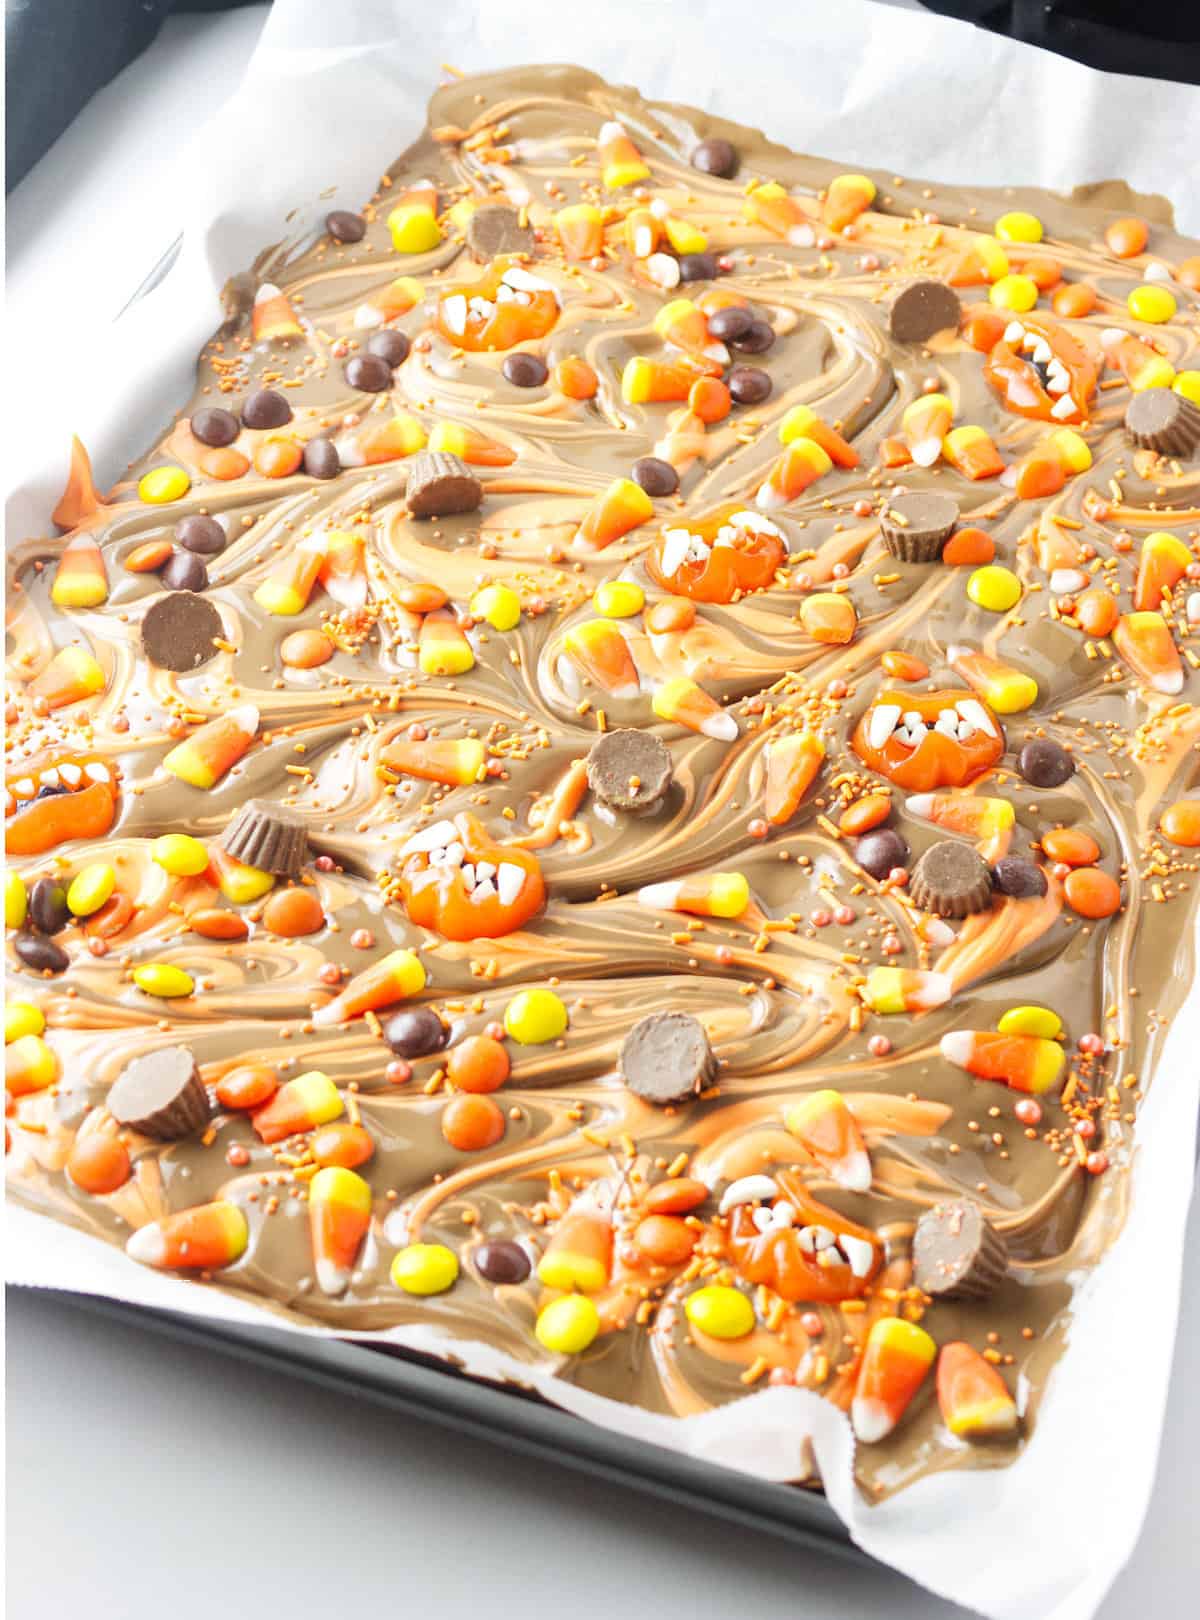 tray of decorated with brittle with corn and reeses pieces.